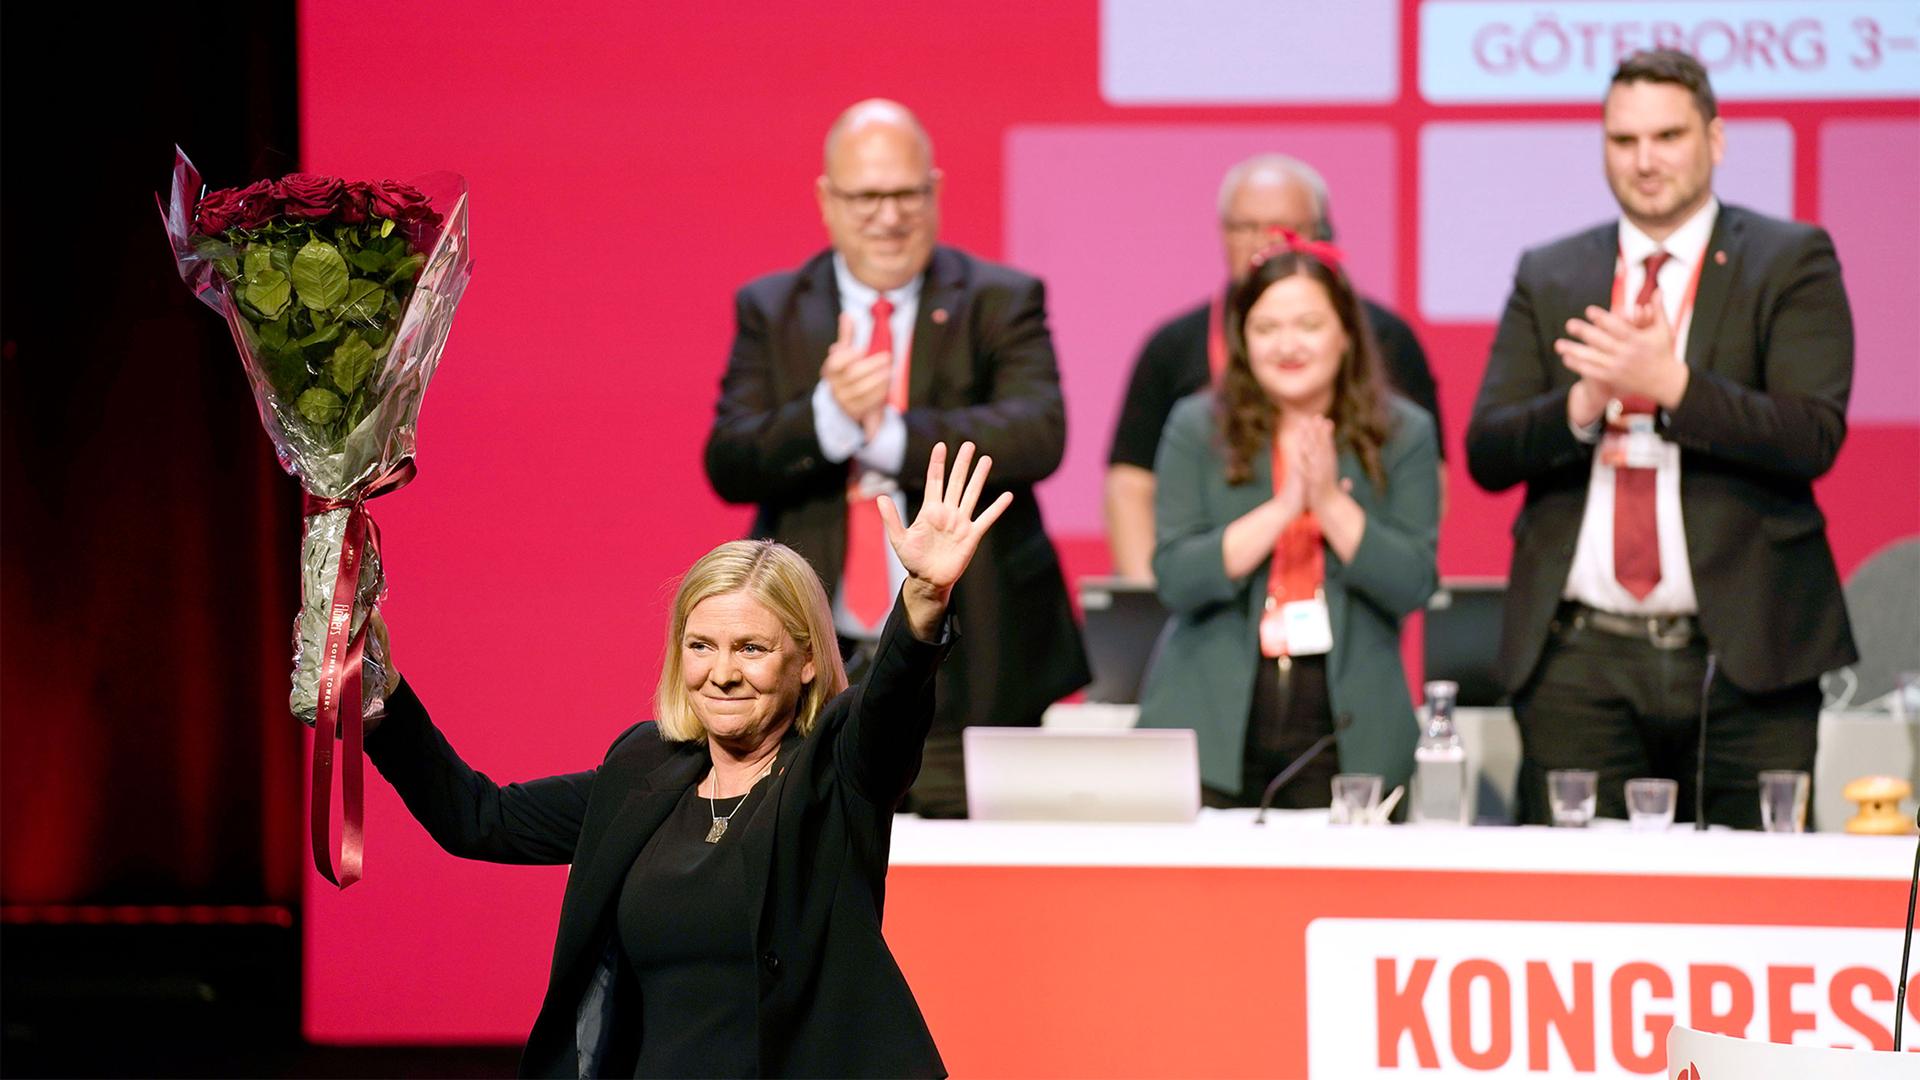 Sweden's Minister of Finance Magdalena Andersson gestures, after being elected to party chairman of the Social Democratic Party at the party’s congress in Gothenburg, Sweden